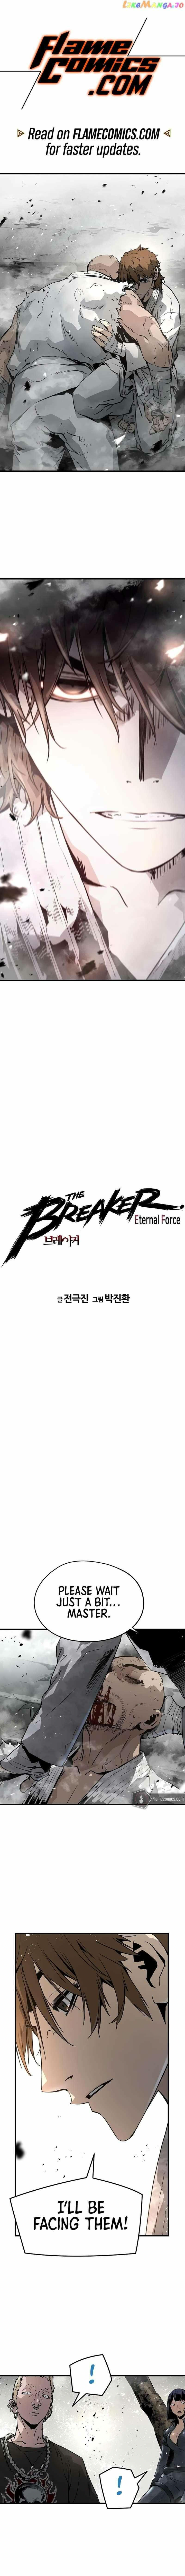 The Breaker: Eternal Force Chapter 90 page 2 - 